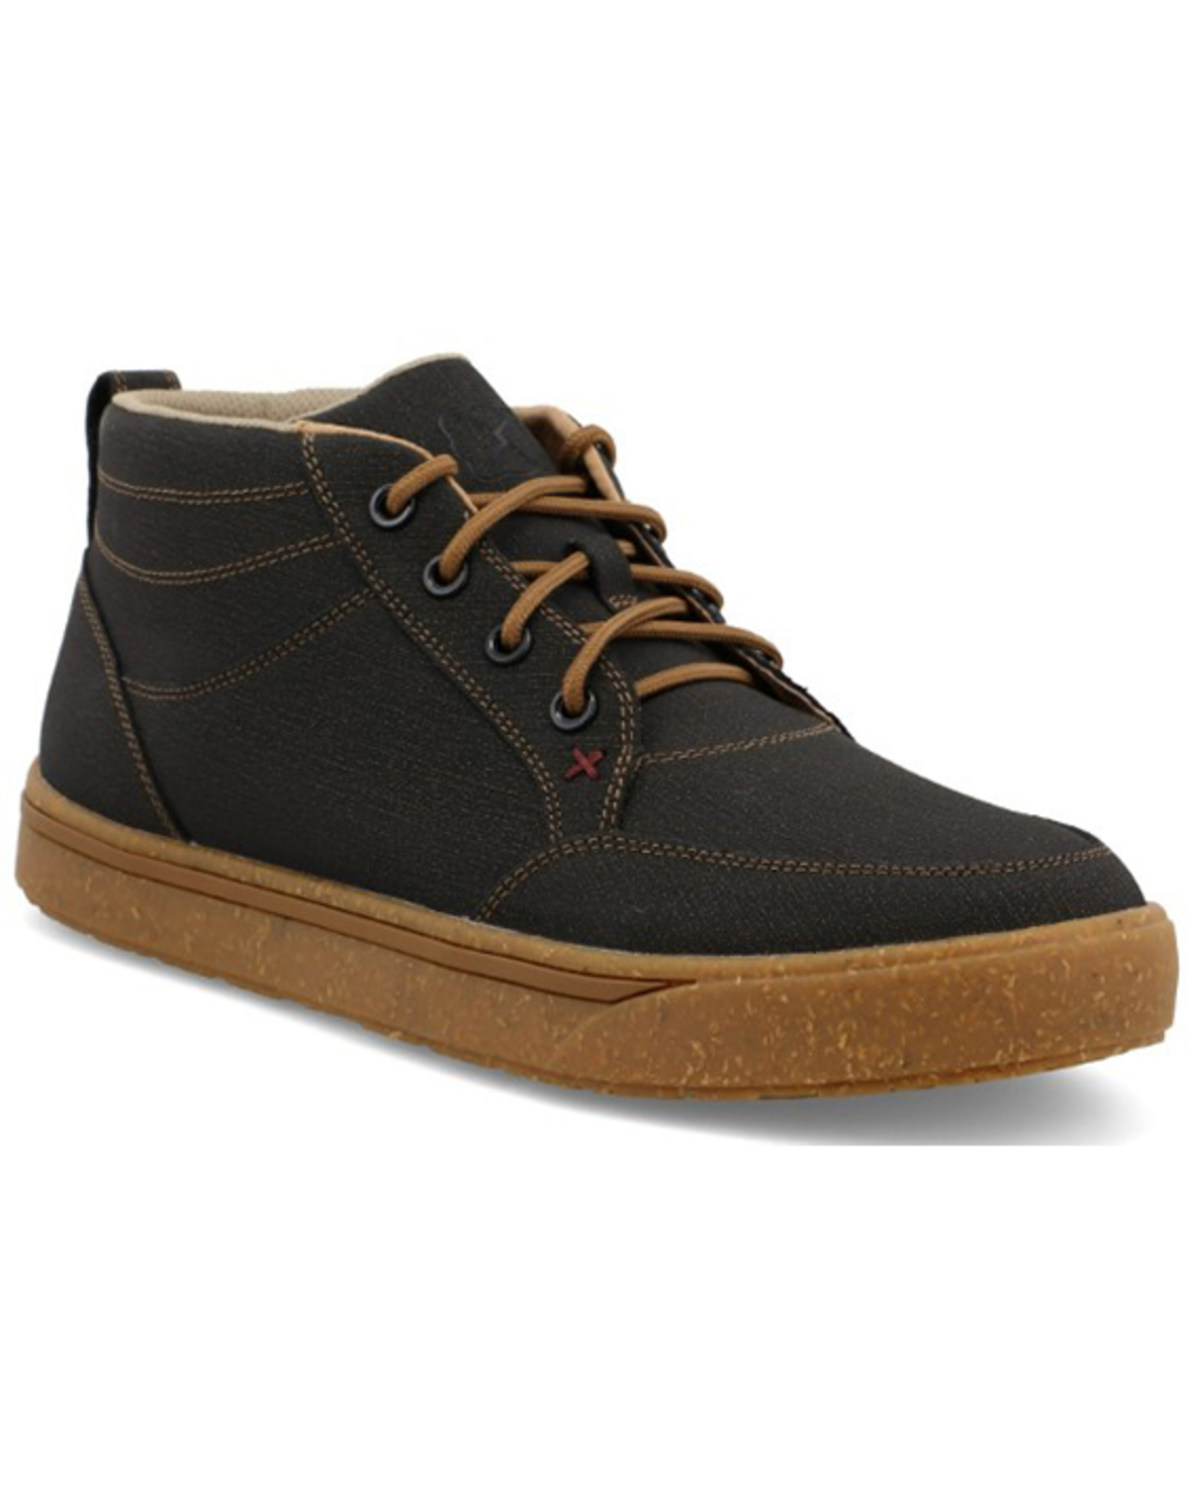 Twisted X Men's Kick Lace-Up Casual Shoe